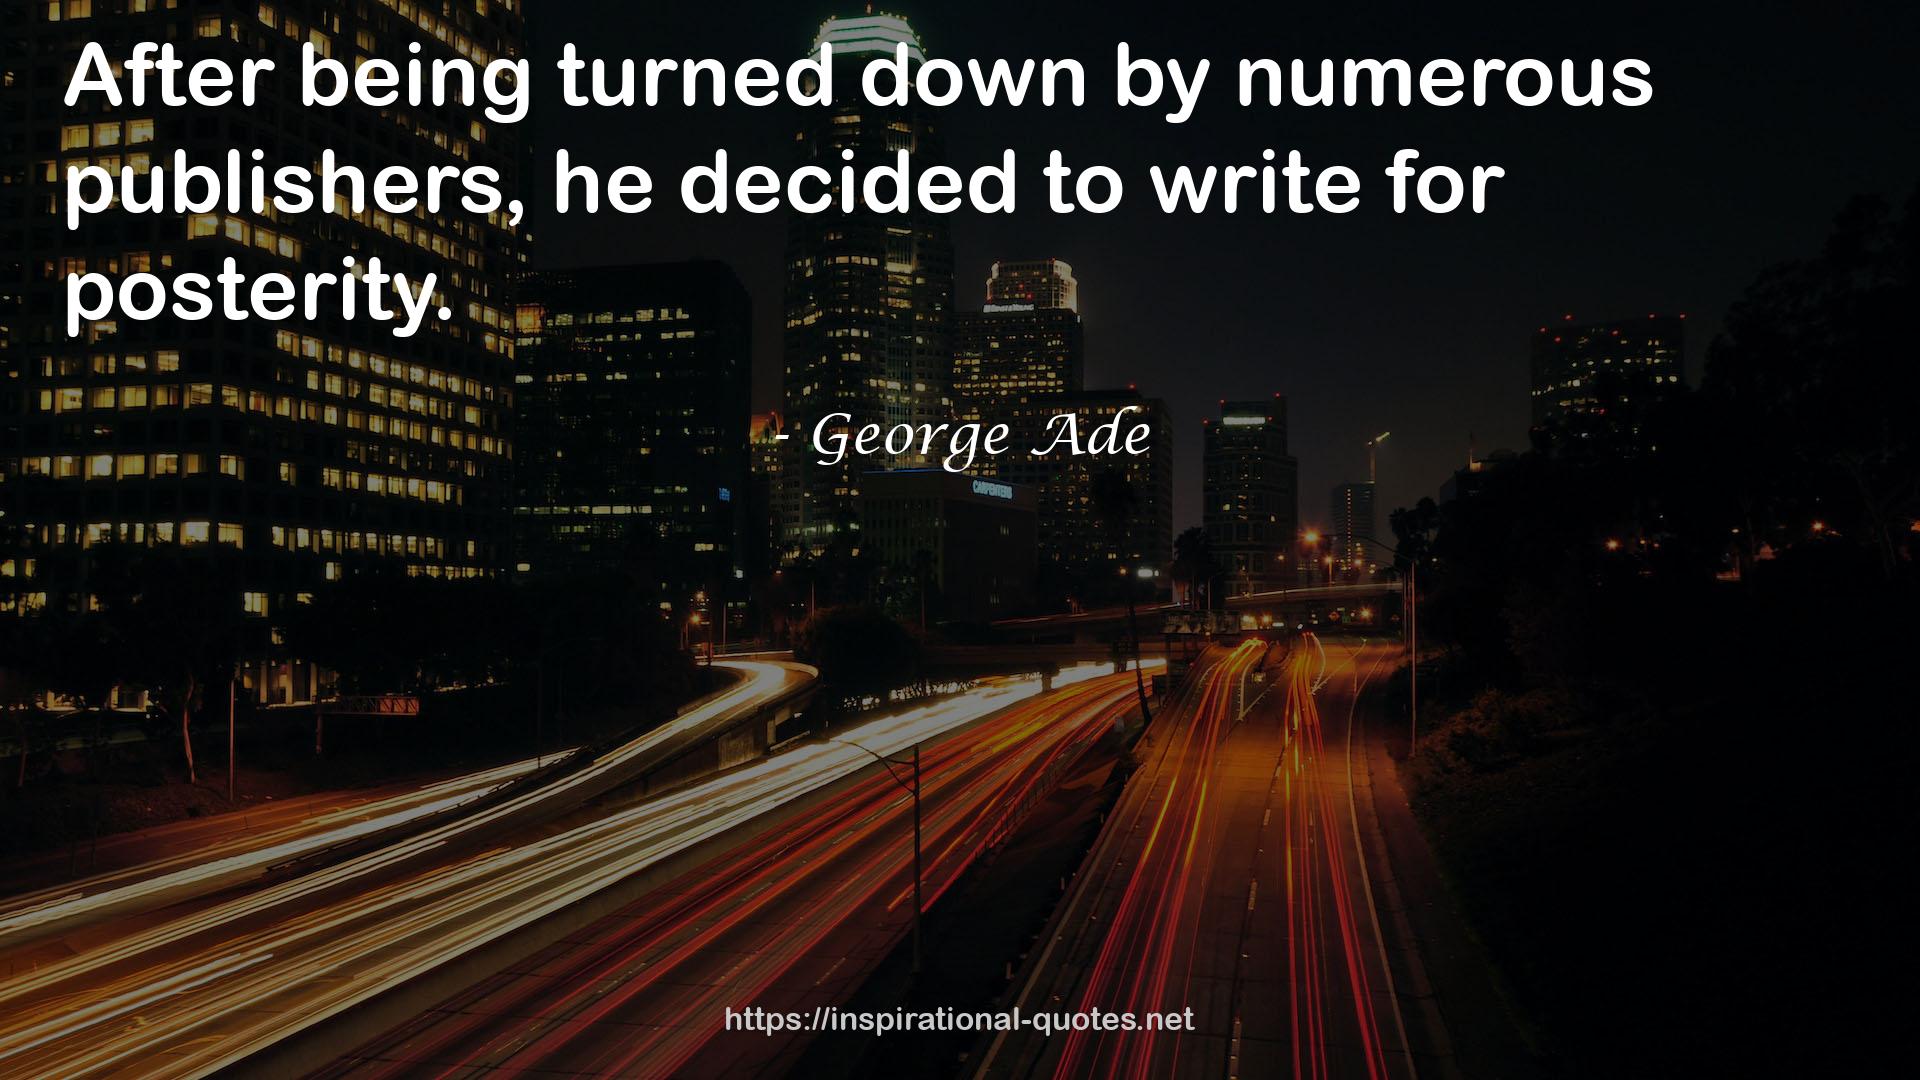 George Ade QUOTES